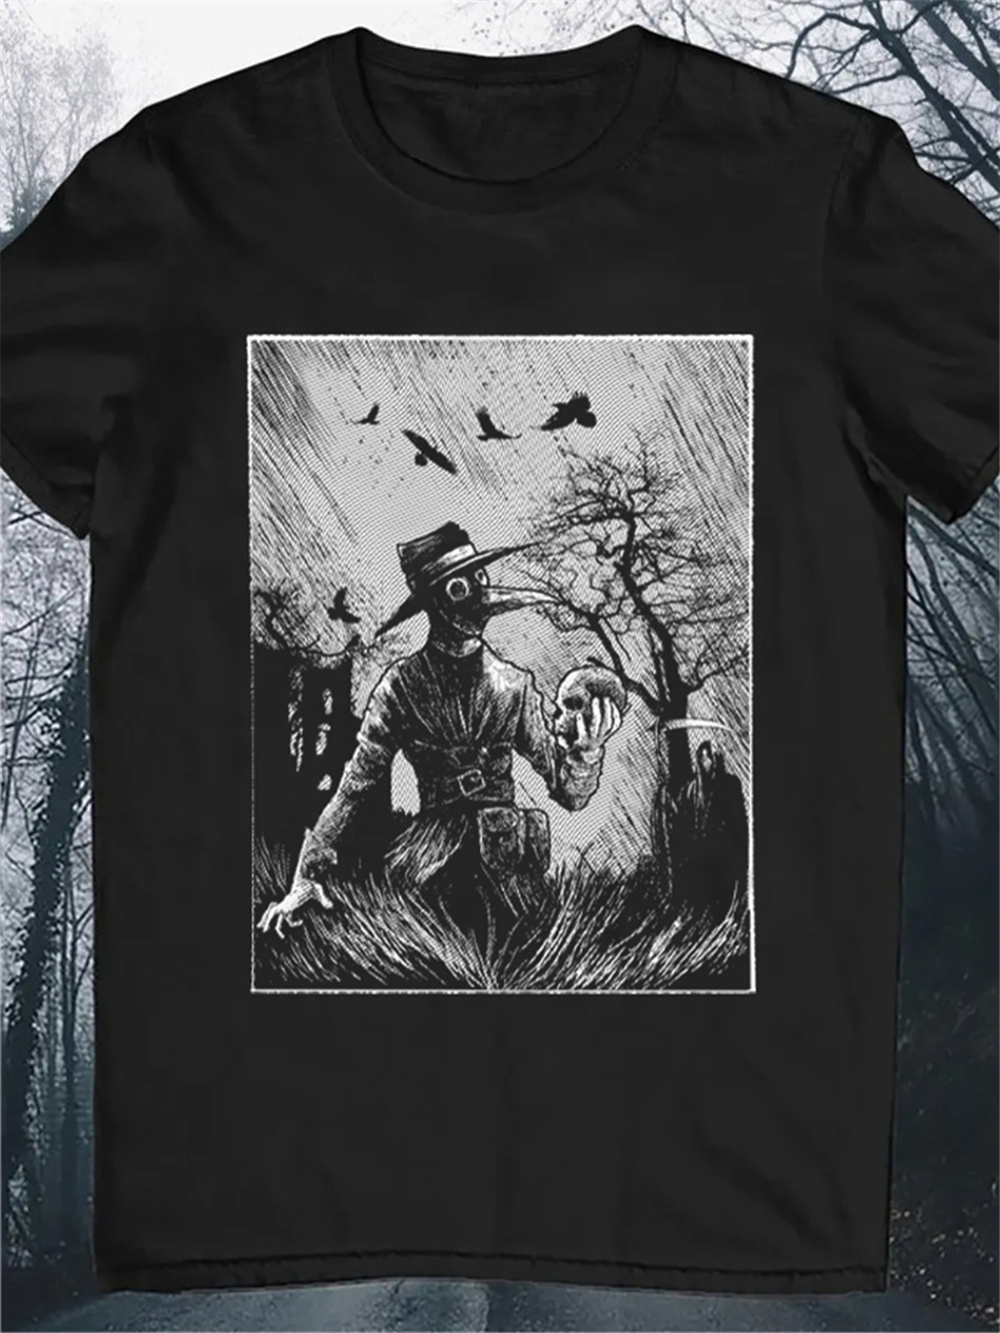 The Plague Doctor and the Grim Reaper Round Neck Short Sleeve Men's T-Shirt